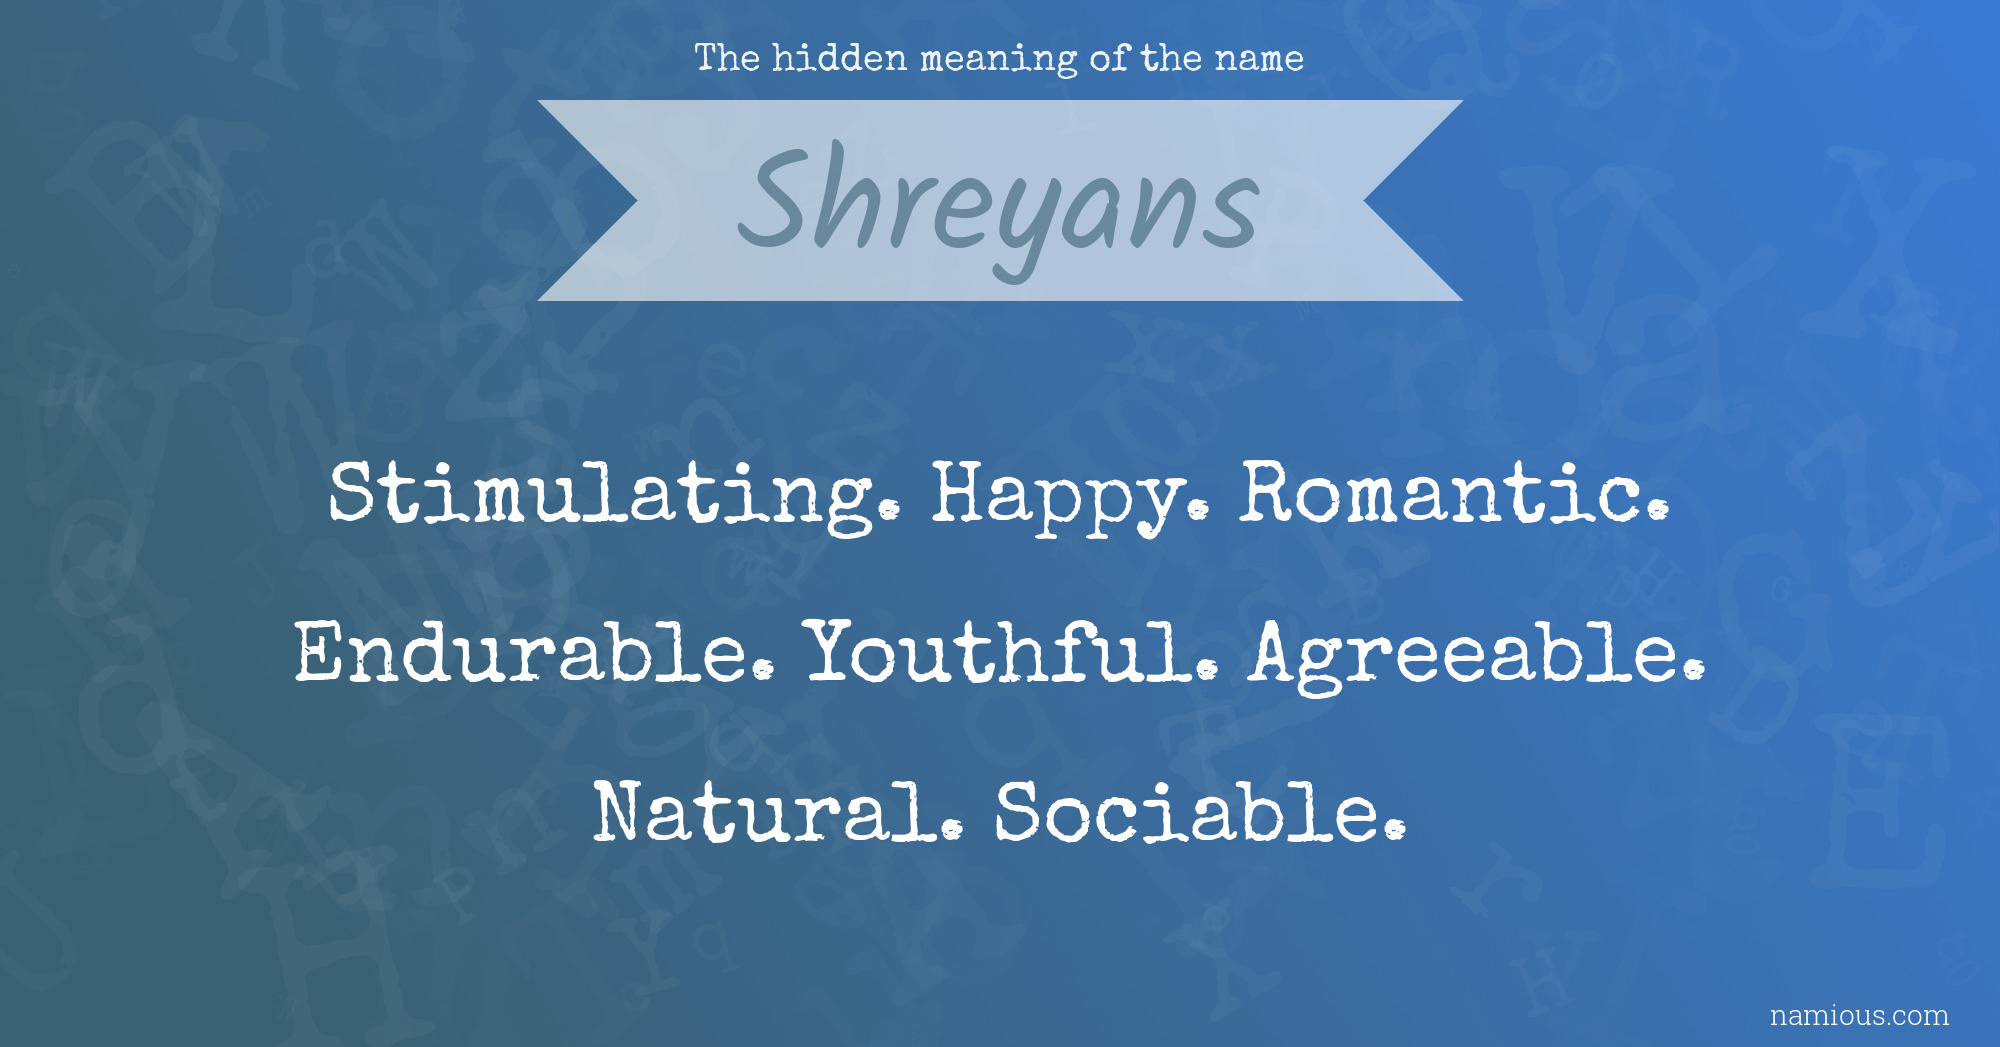 The hidden meaning of the name Shreyans